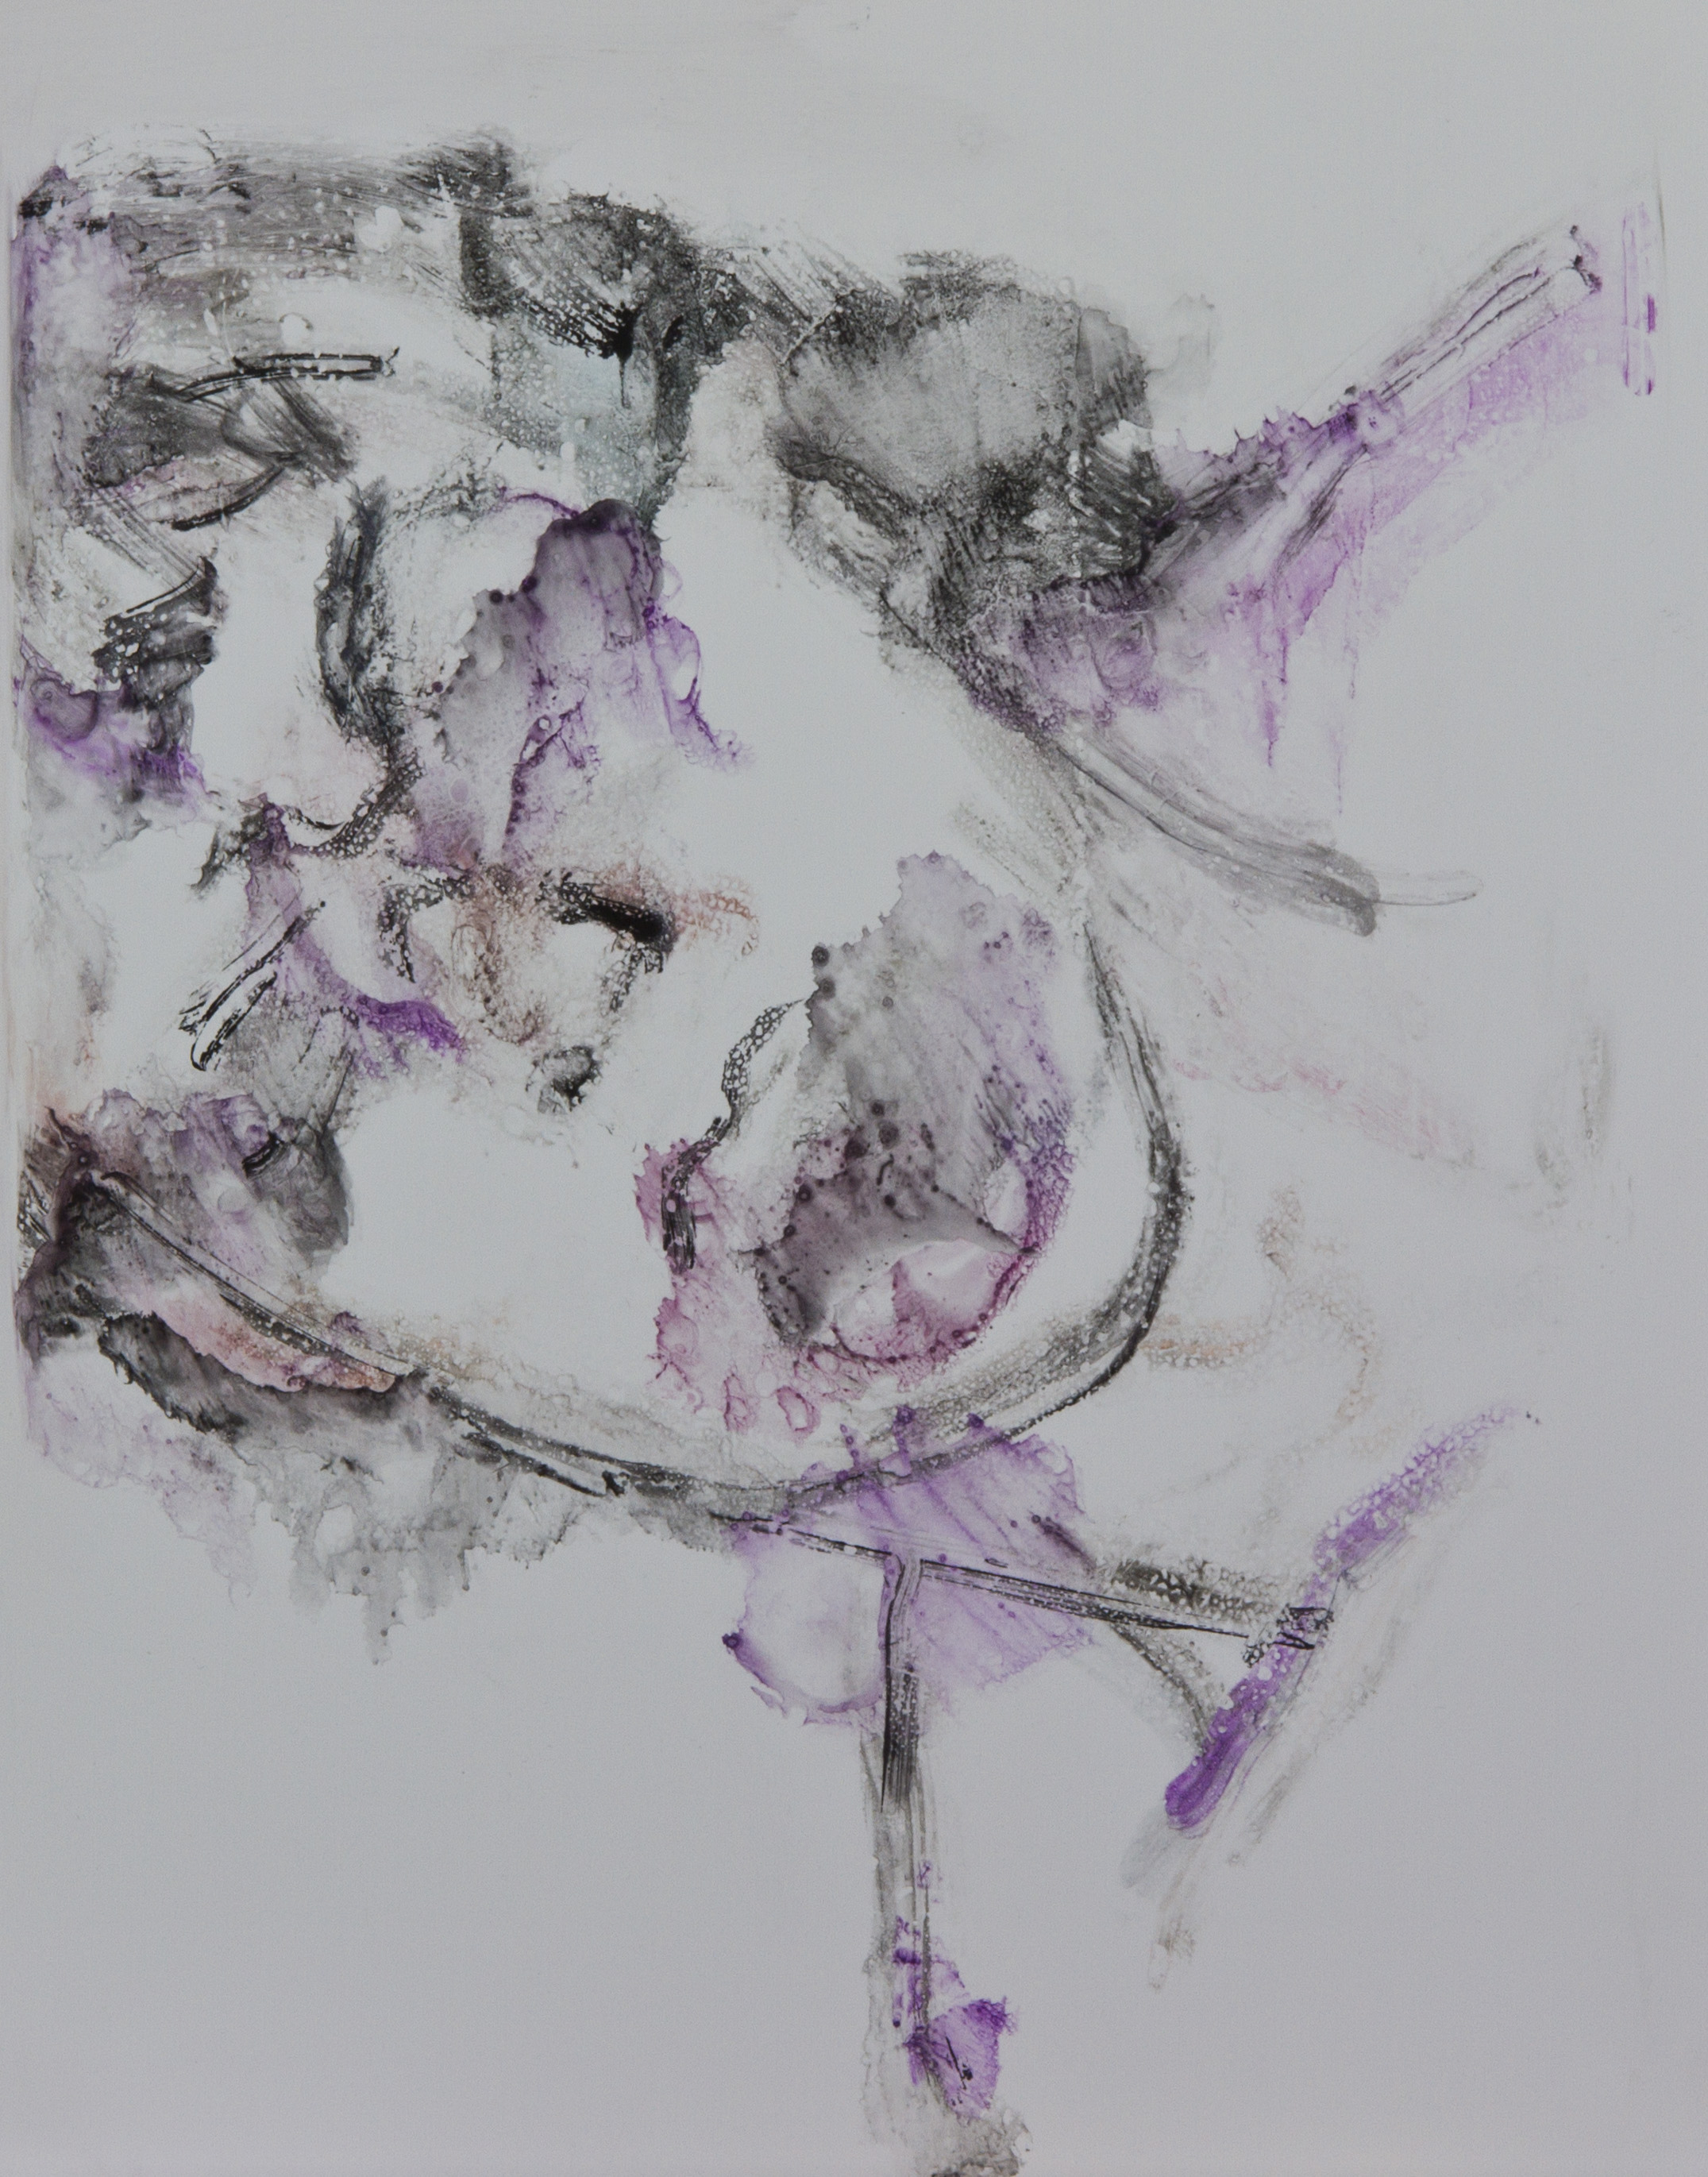 Acts 36, 2010, watercolor monotype on polypropylene, 11x14 inches